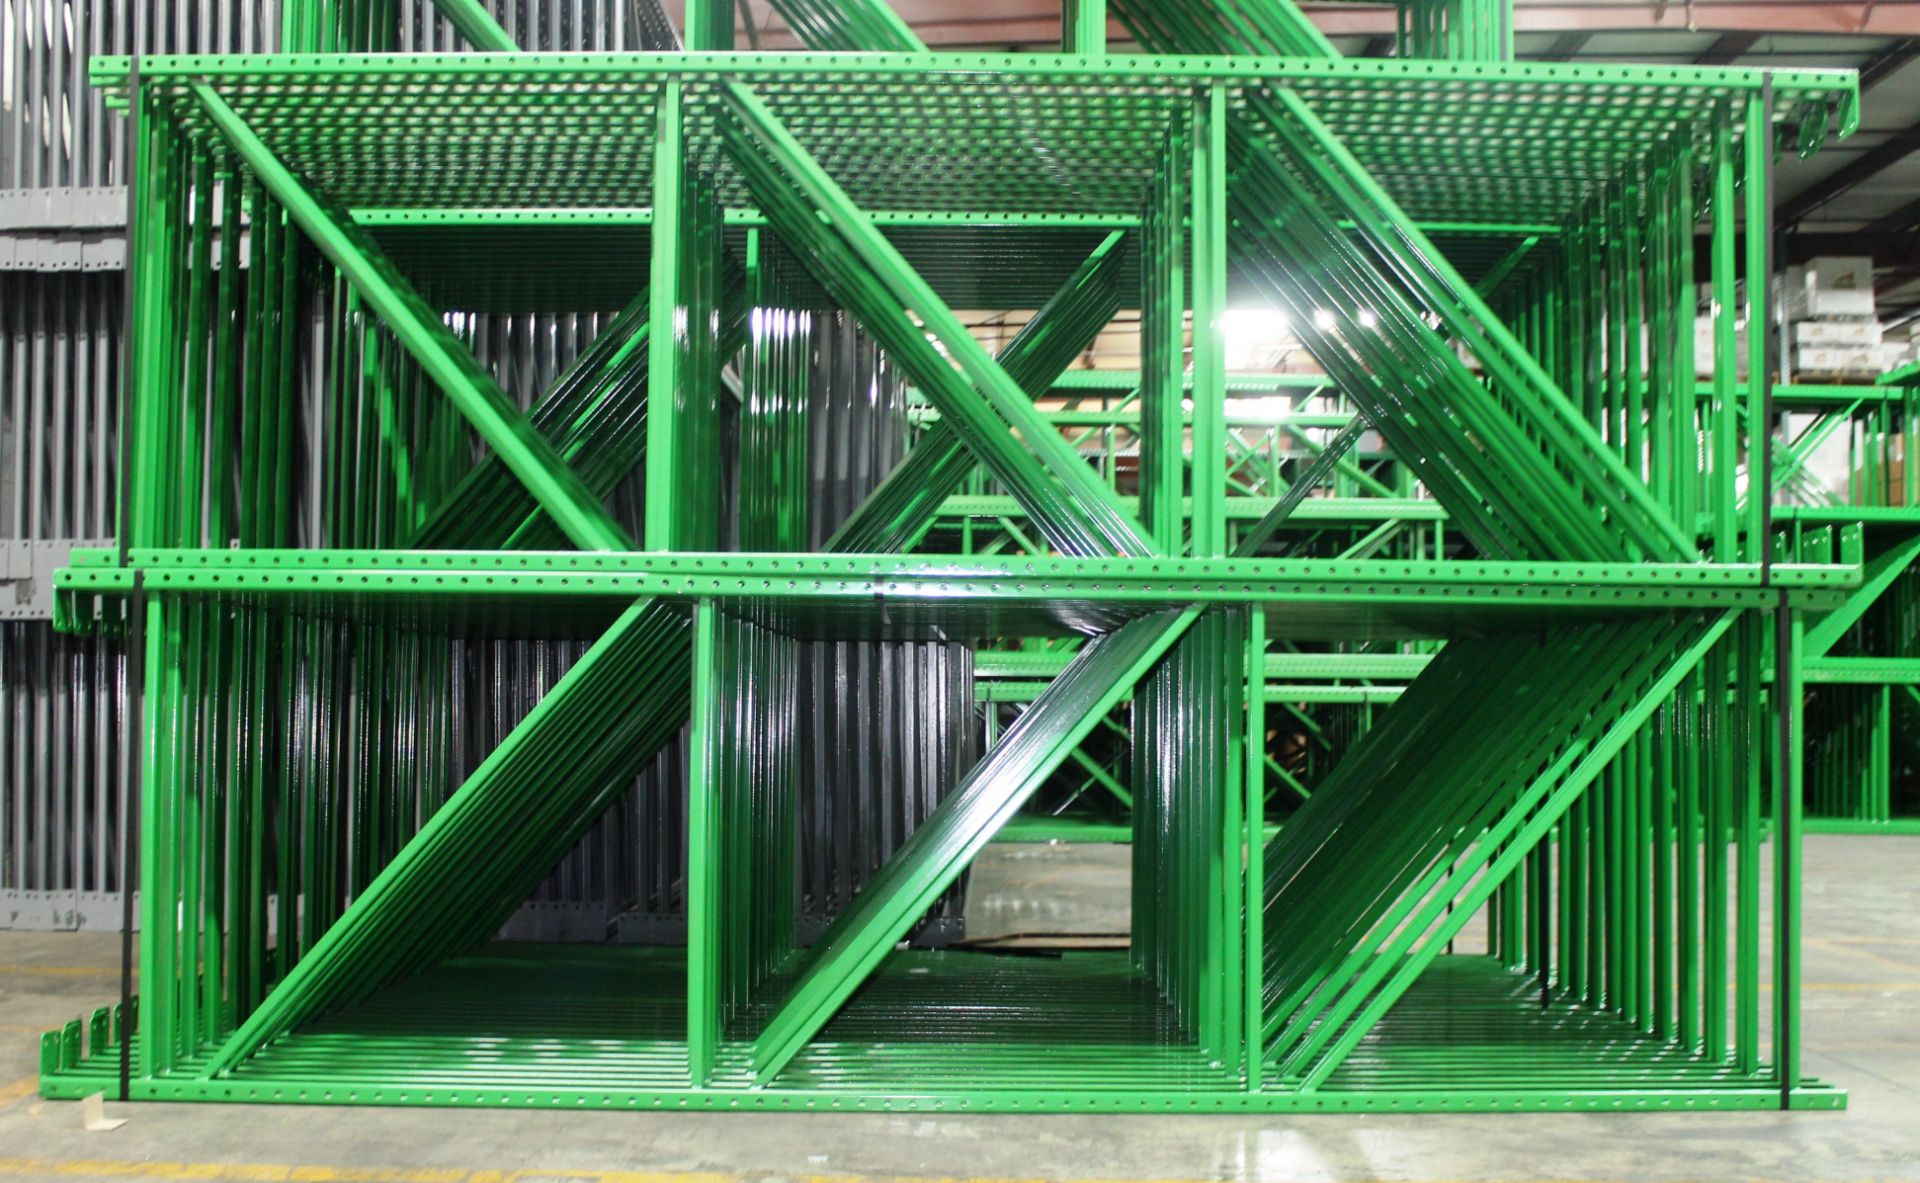 14 BAYS OF TEARDROP STYLE PALLET RACK, LIKE NEW, SIZE: 12'H x 42"D X 8'W - Image 2 of 4